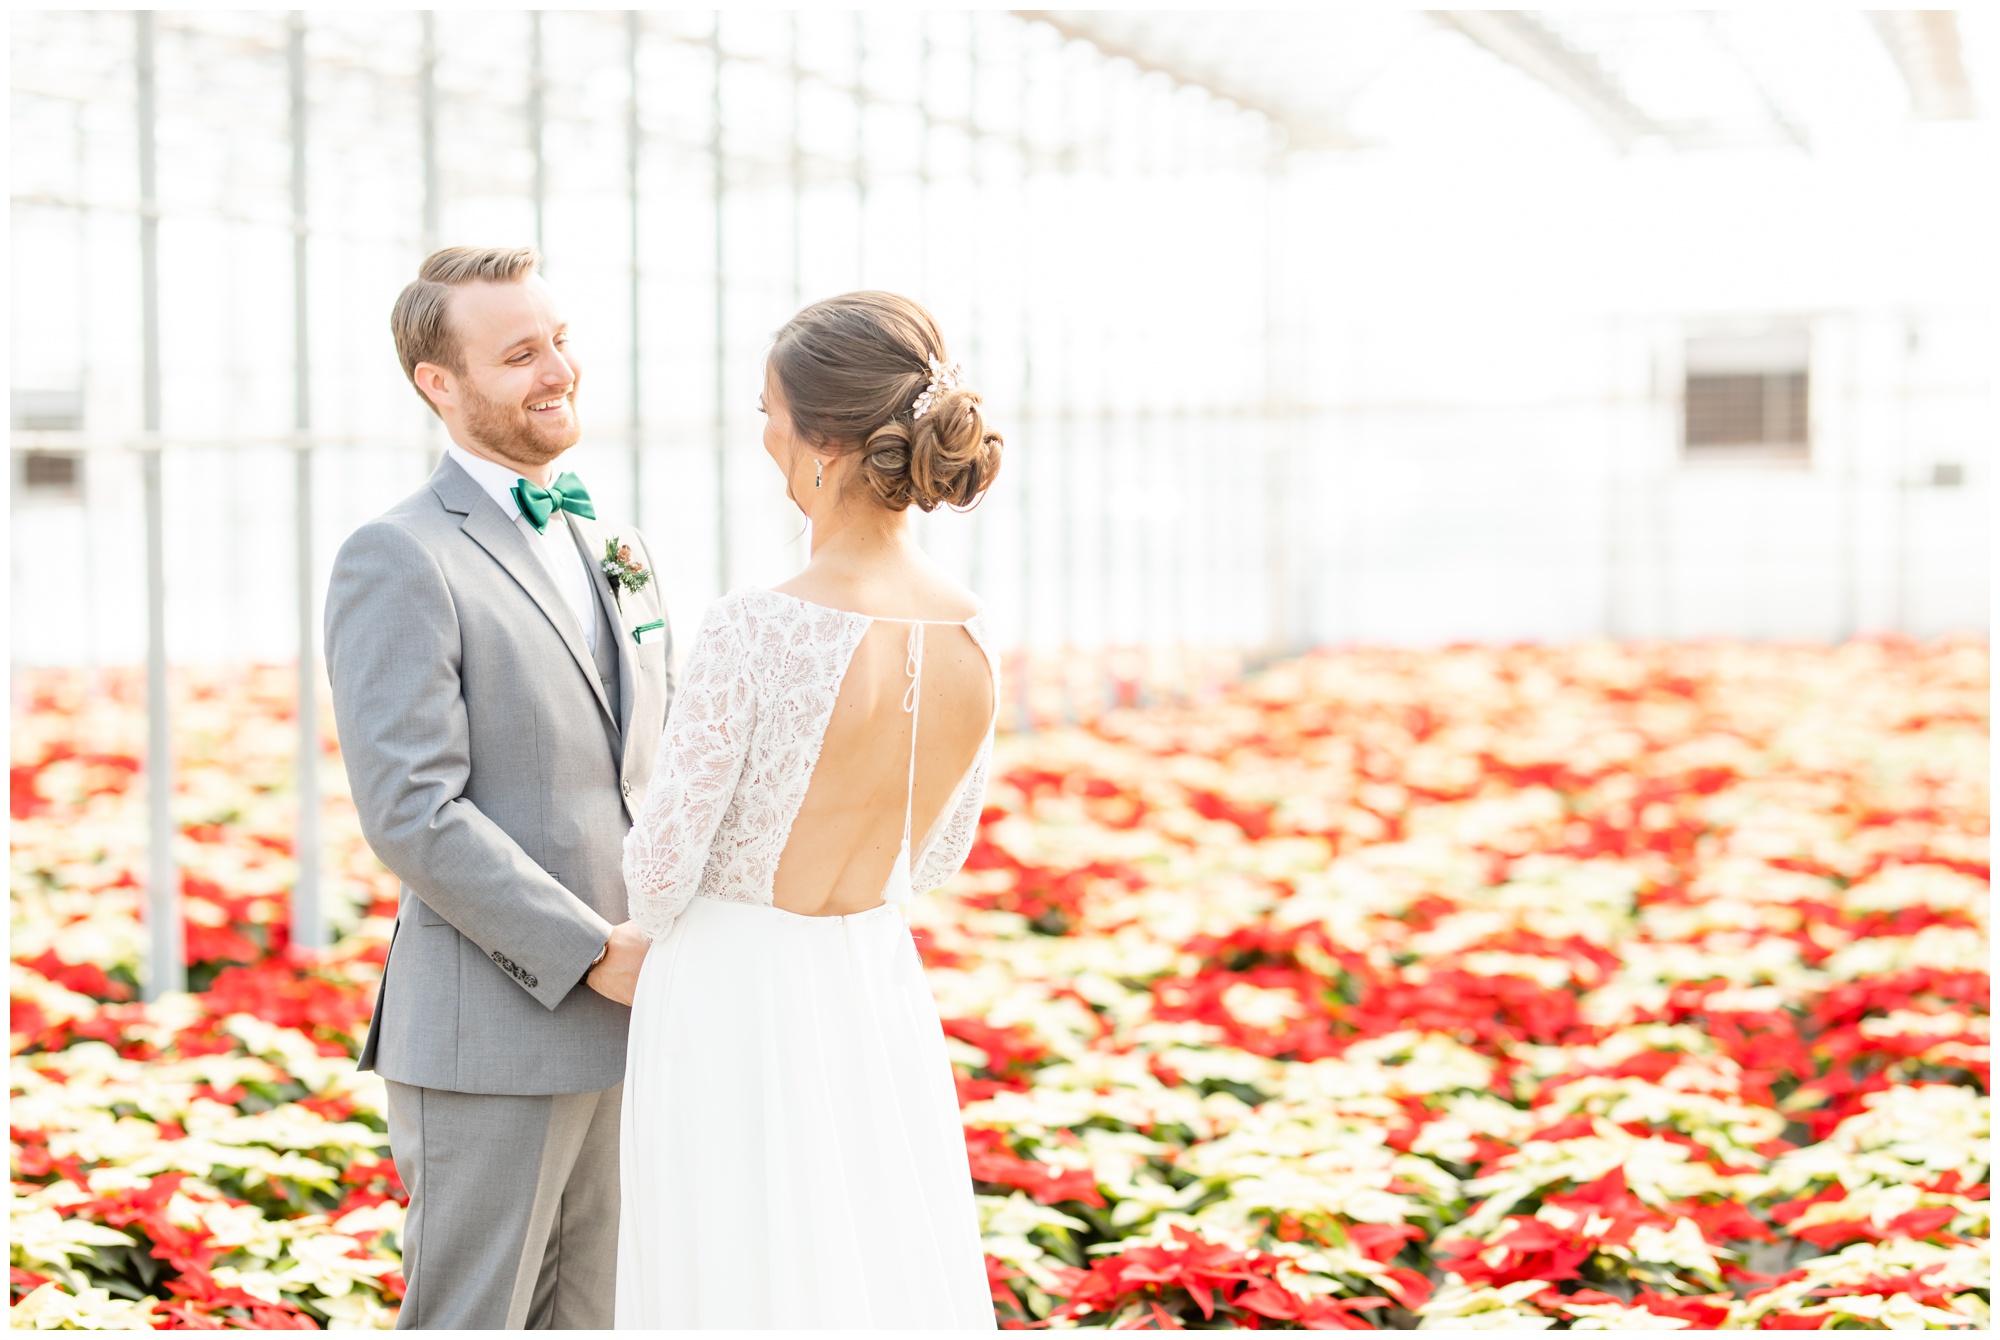 Greenhouse winter wedding bride and groom standing in poinsettias